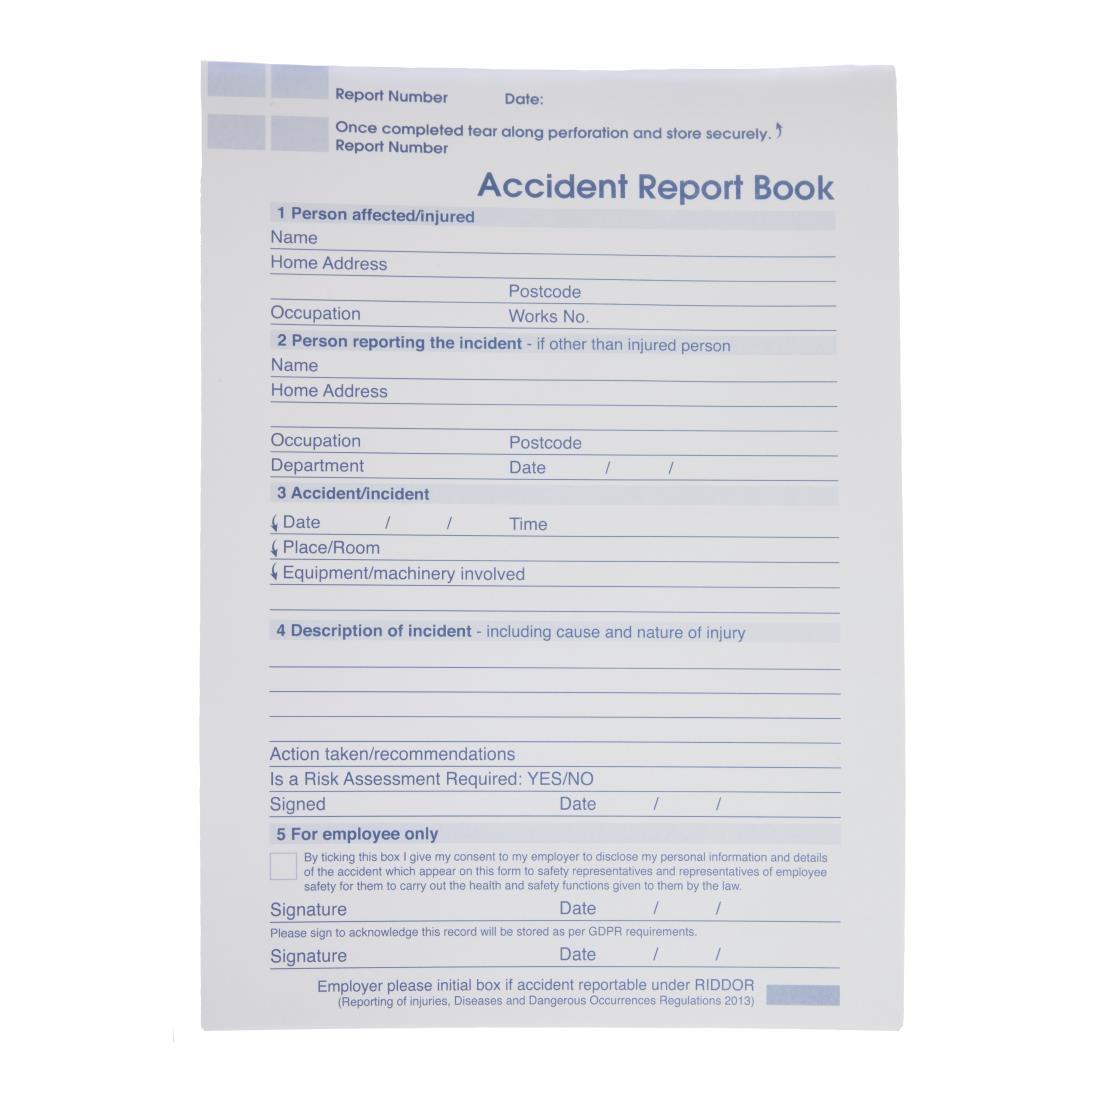 Accident Book - A4 - 1G0005  - 4